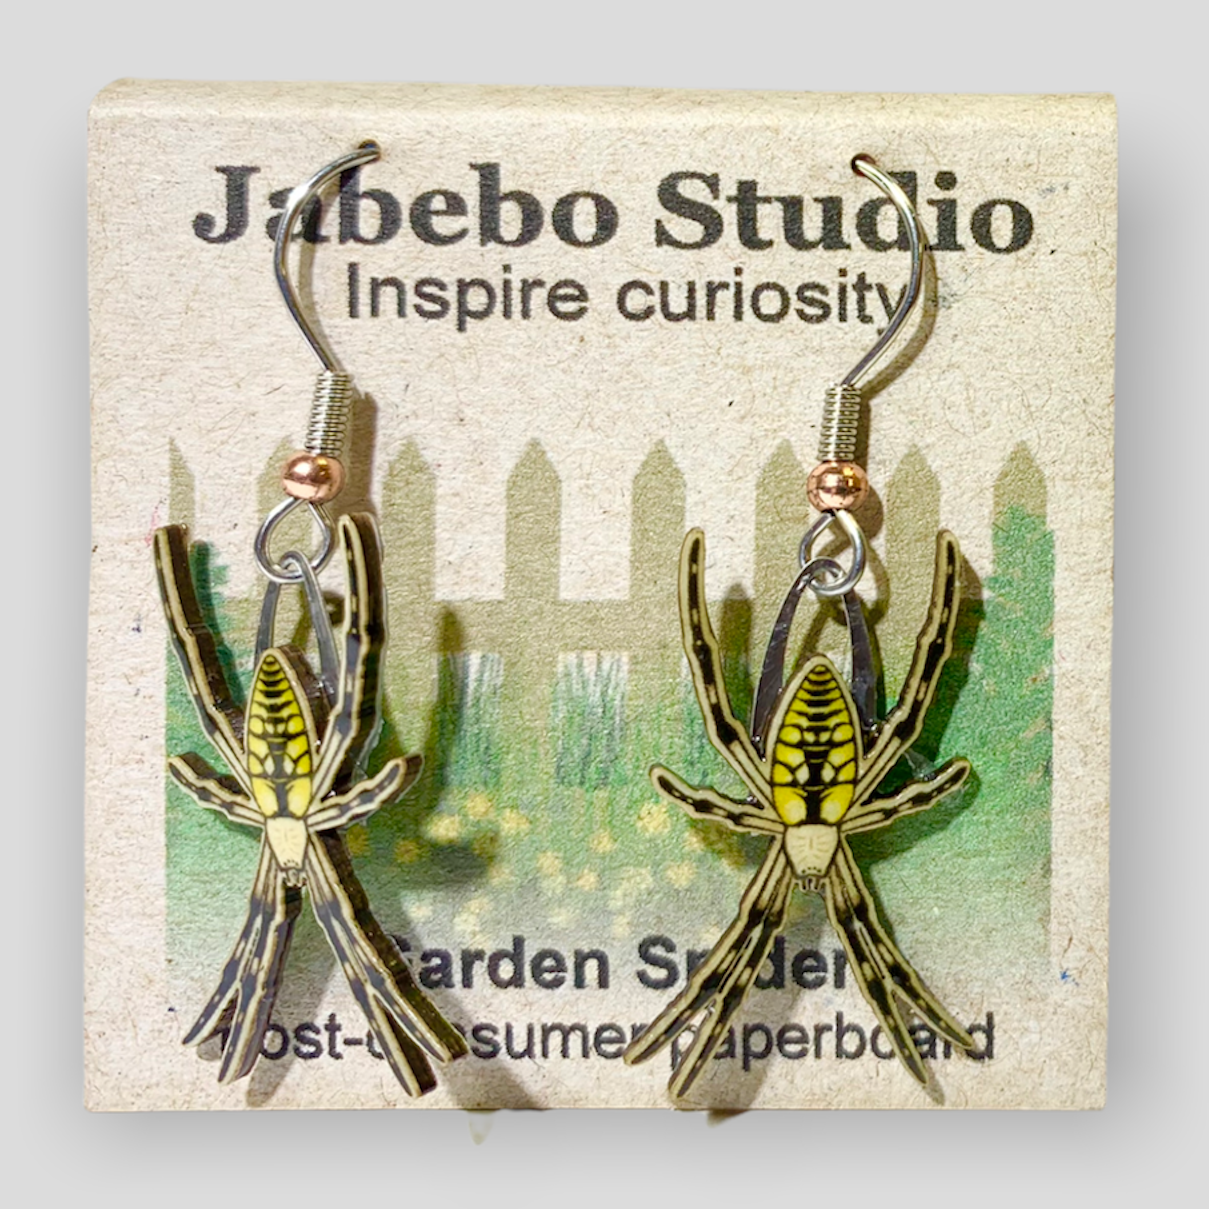 Picture shown is of 1 inch tall pair of earrings of the arachnid the Garden Spider